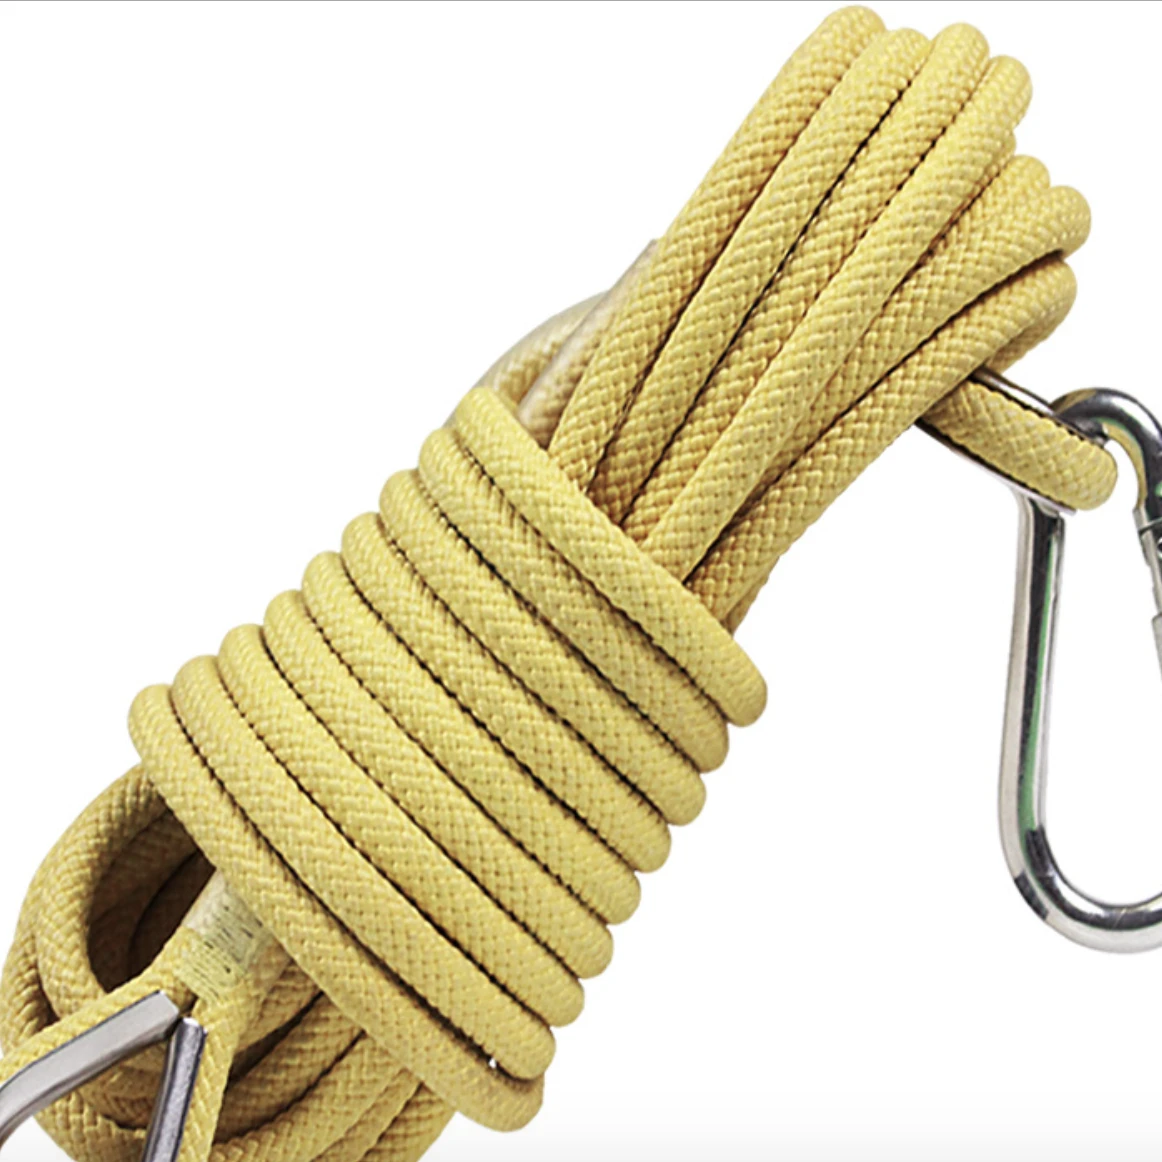 High strength fire resistance aramid braided rope